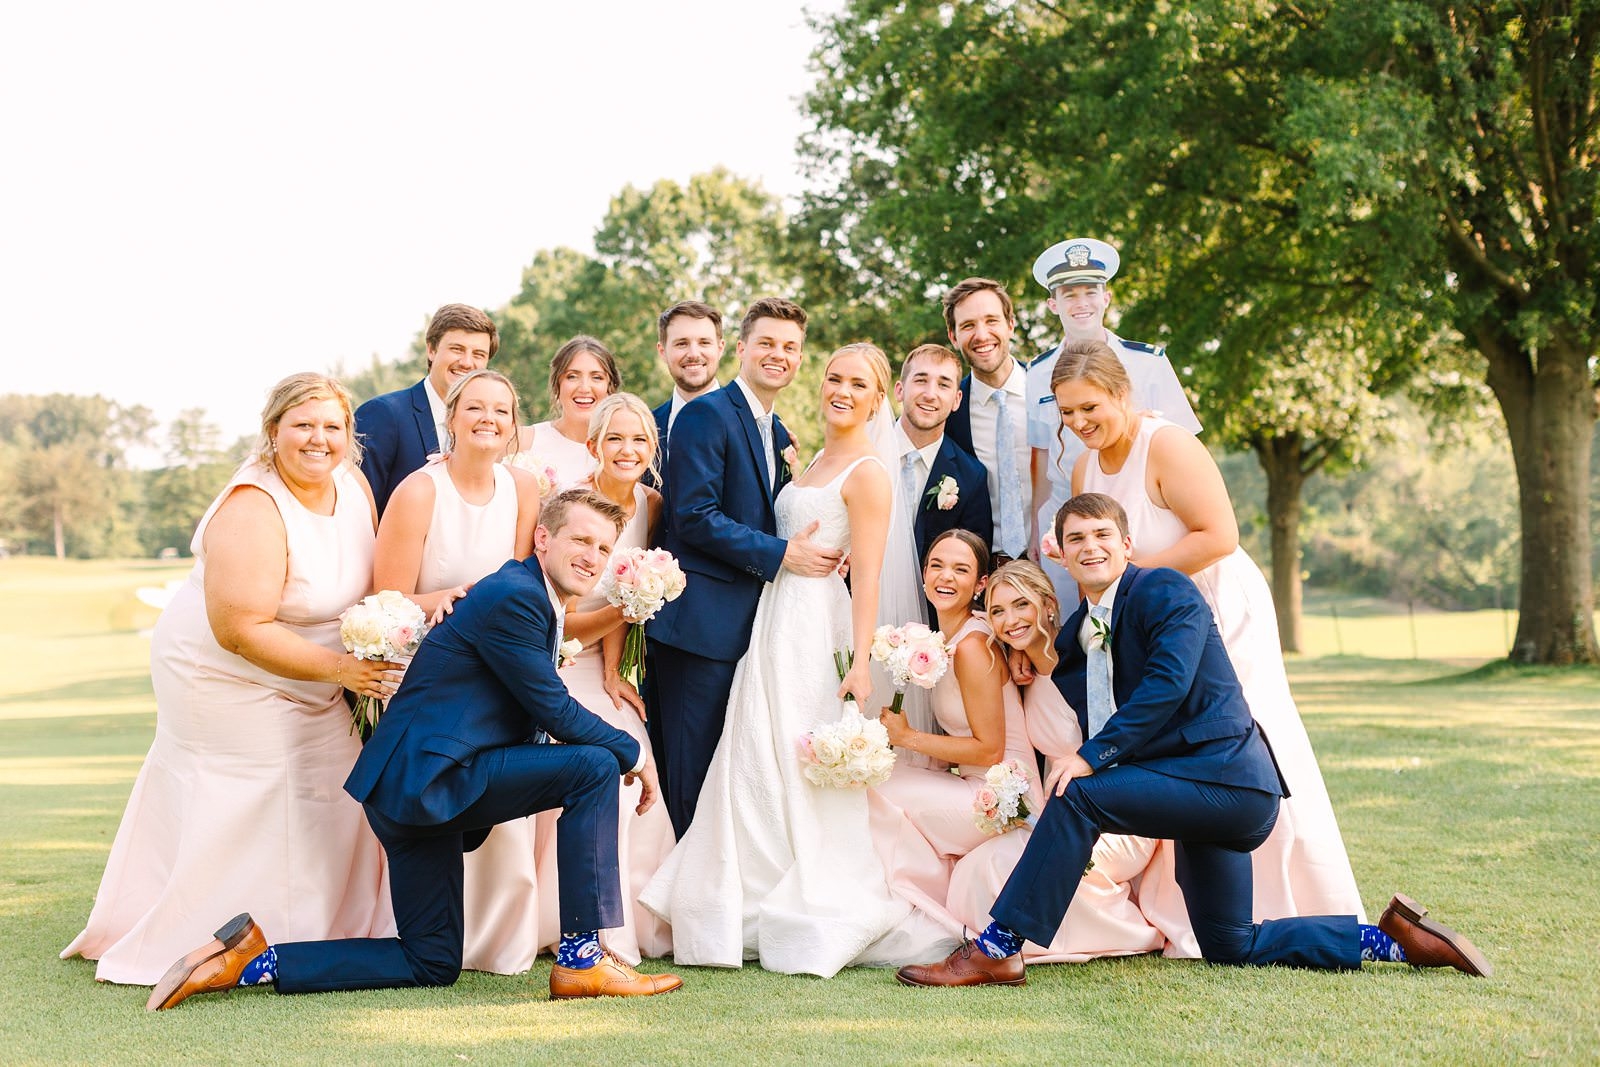 An Evansville Country Club Wedding | Ashley and Beau | Bret and Brandie Photography182.jpg